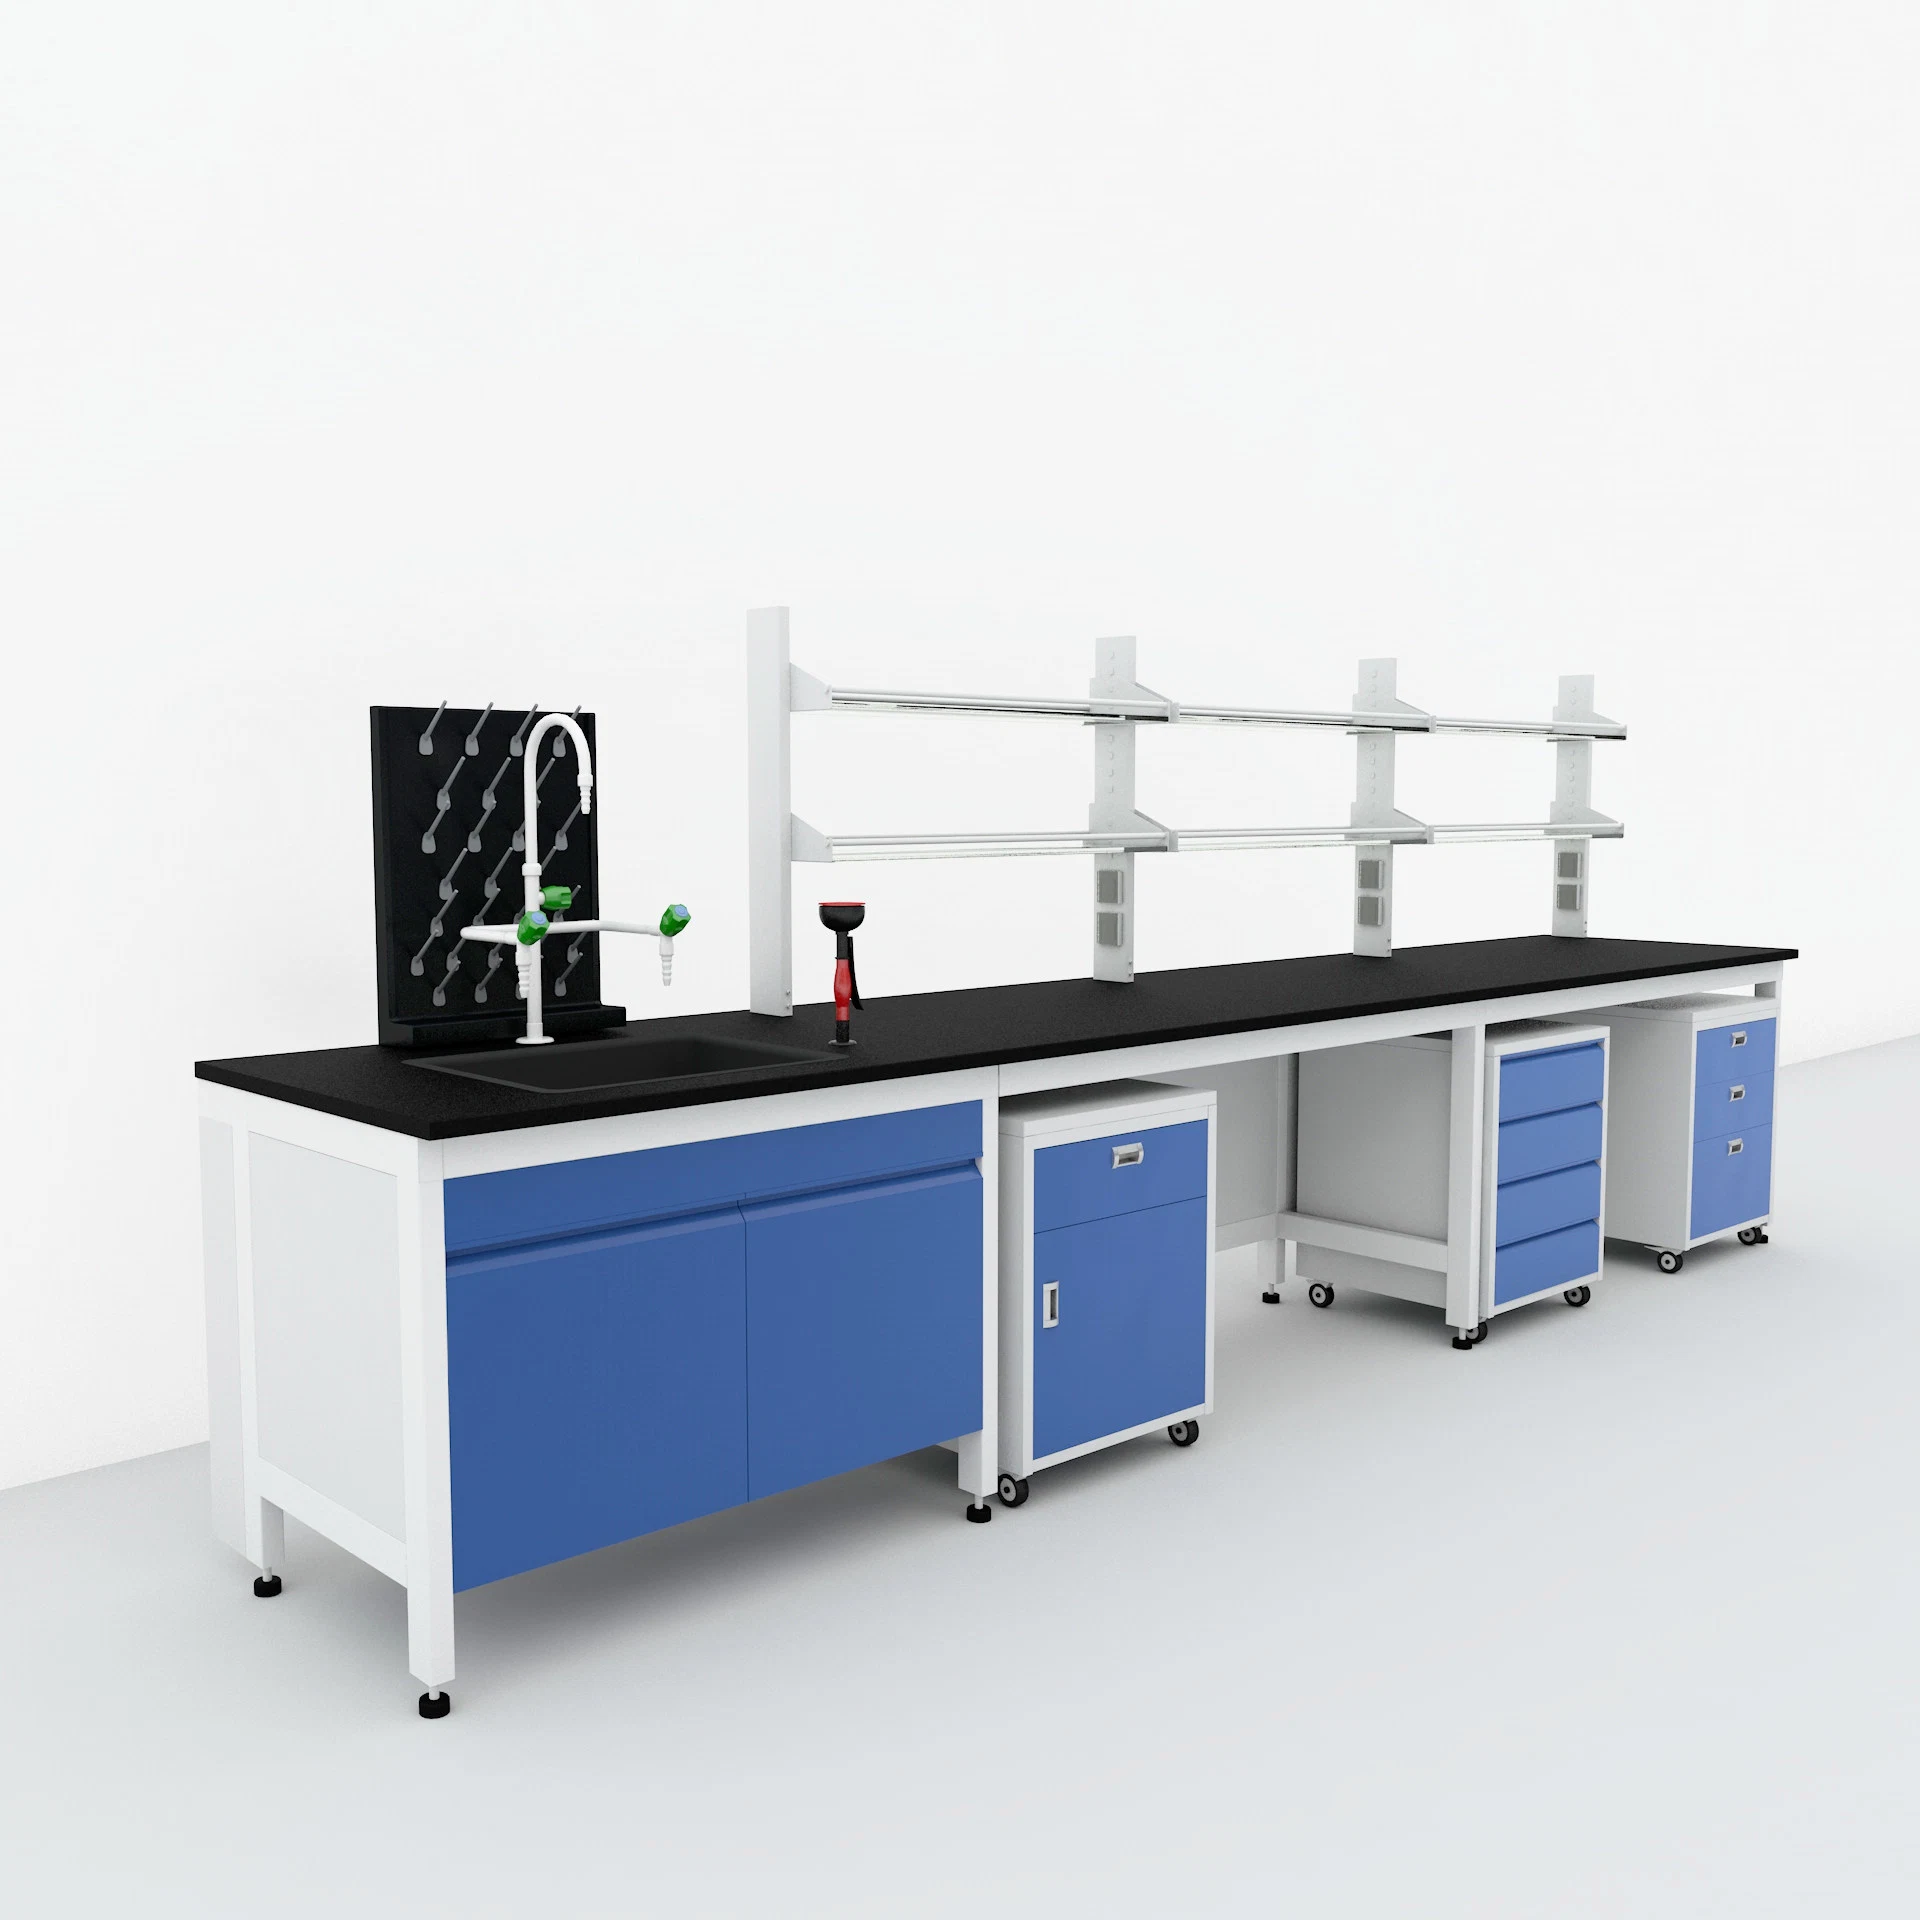 Science Laboratory Equipment Blue Tia Metal Lab Table Furniture Lab Sink Bench